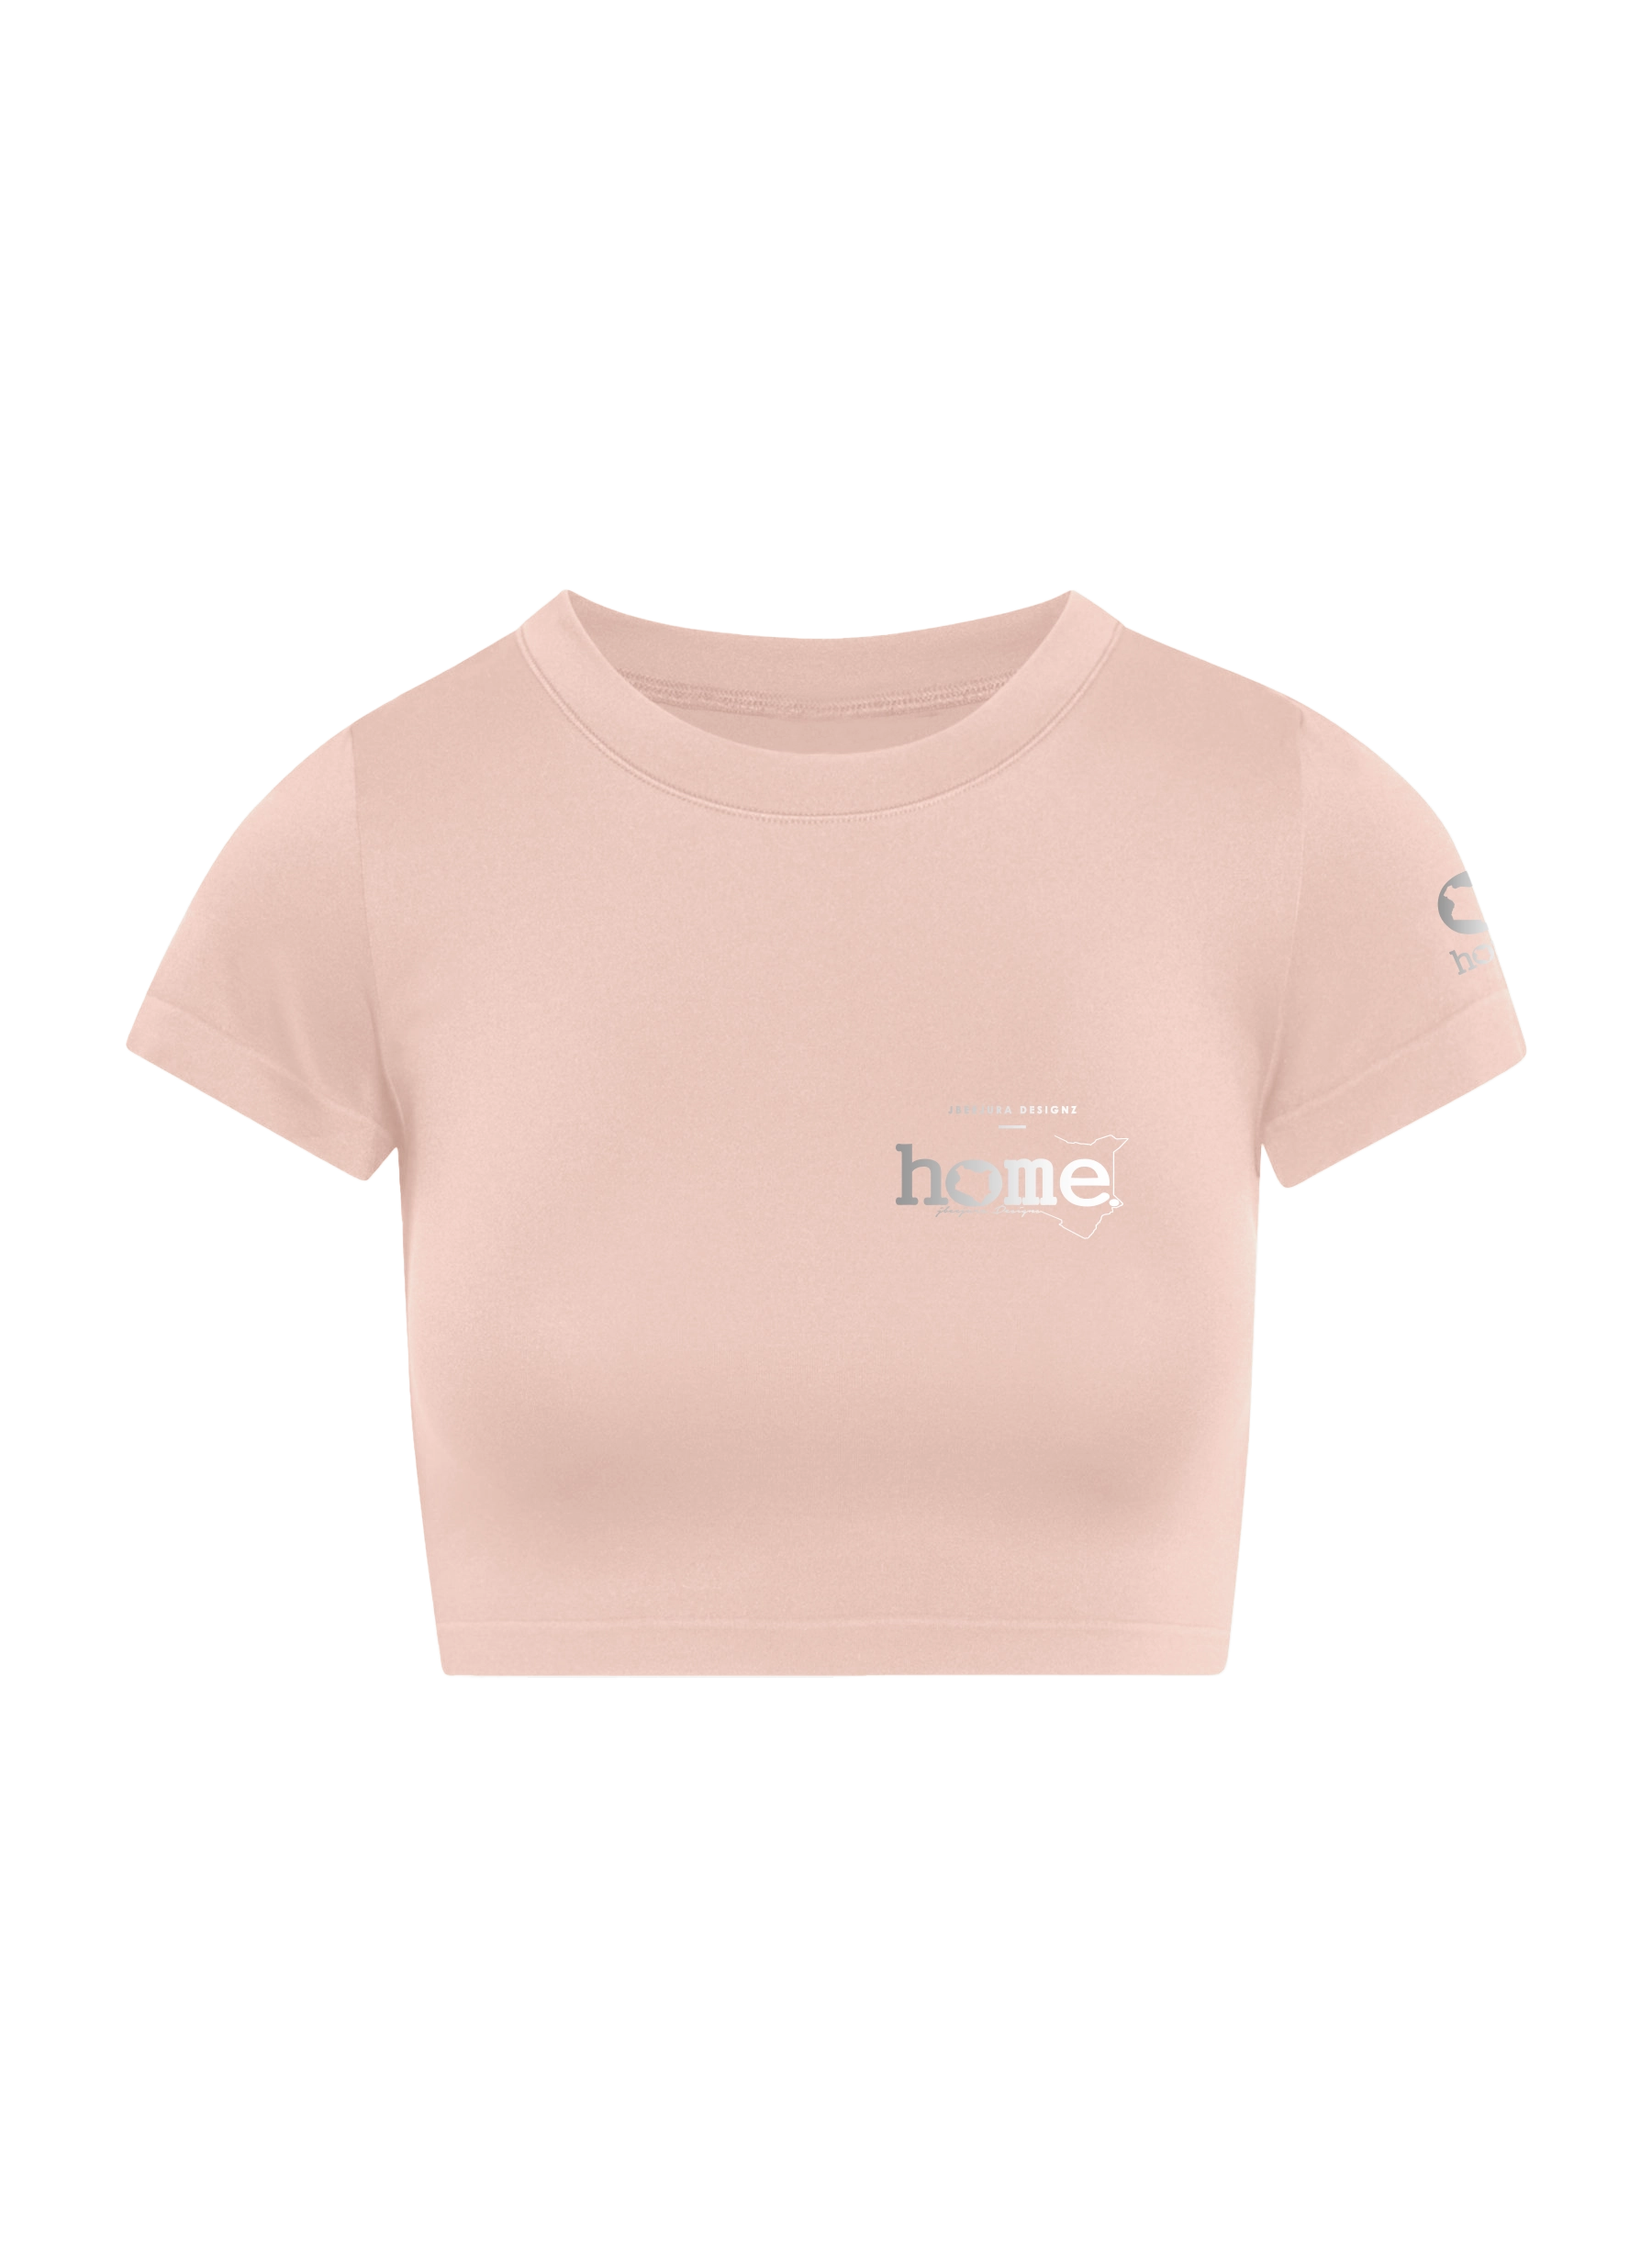 home_254 SHORT SLEEVED PEACH CROPPED ARIA TEE WITH A SILVER  3D WORDS PRINT 